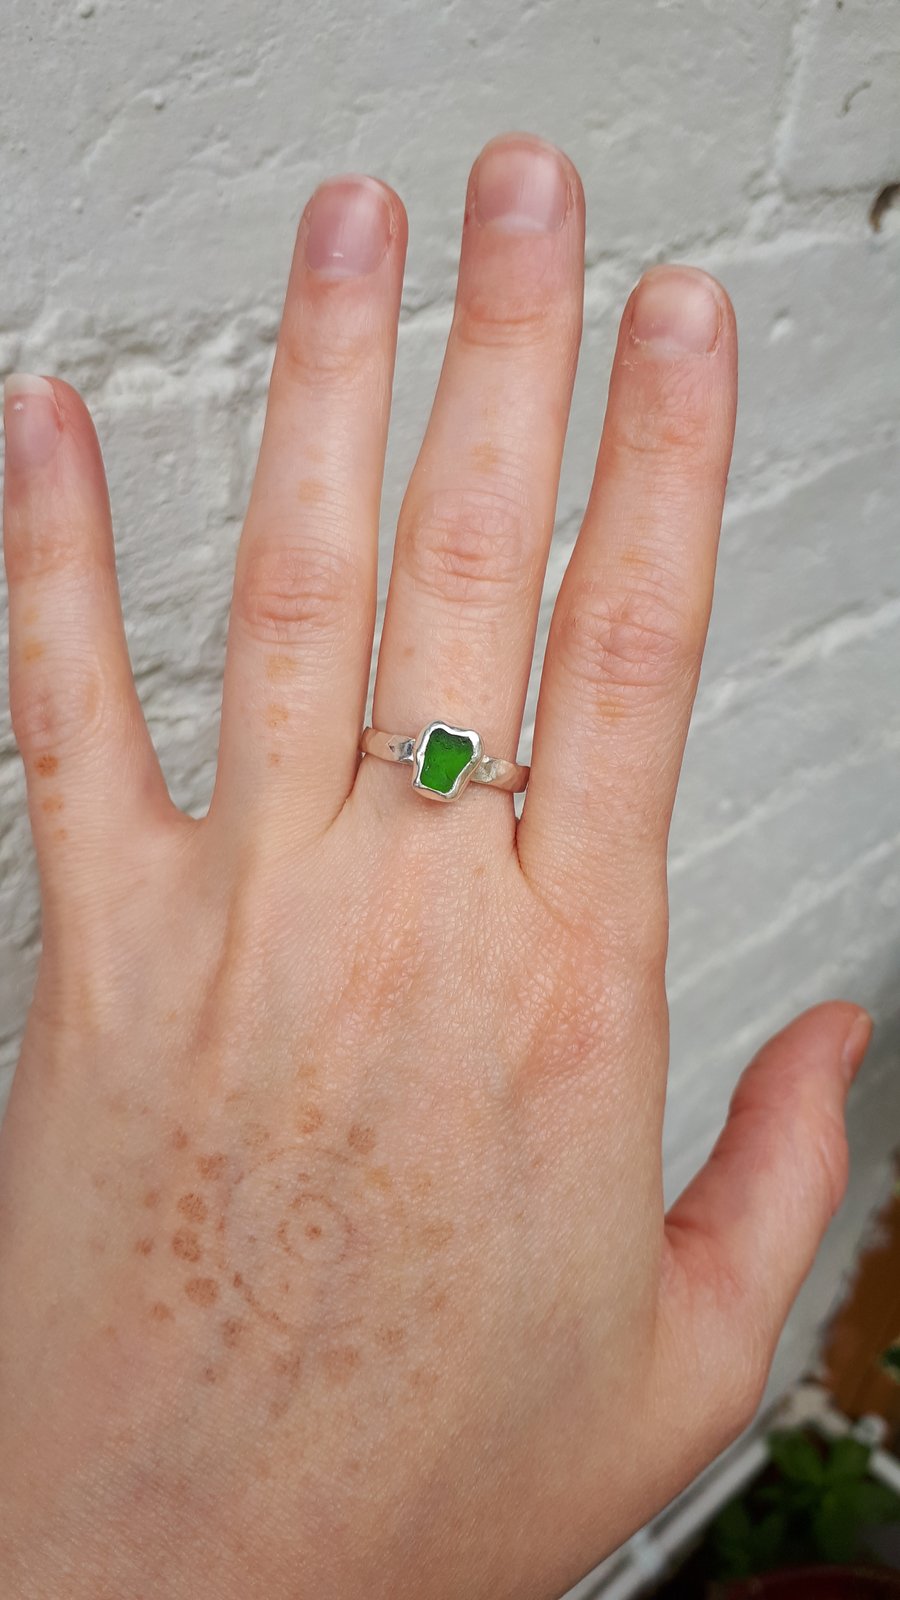 Kelly green sea glass ring